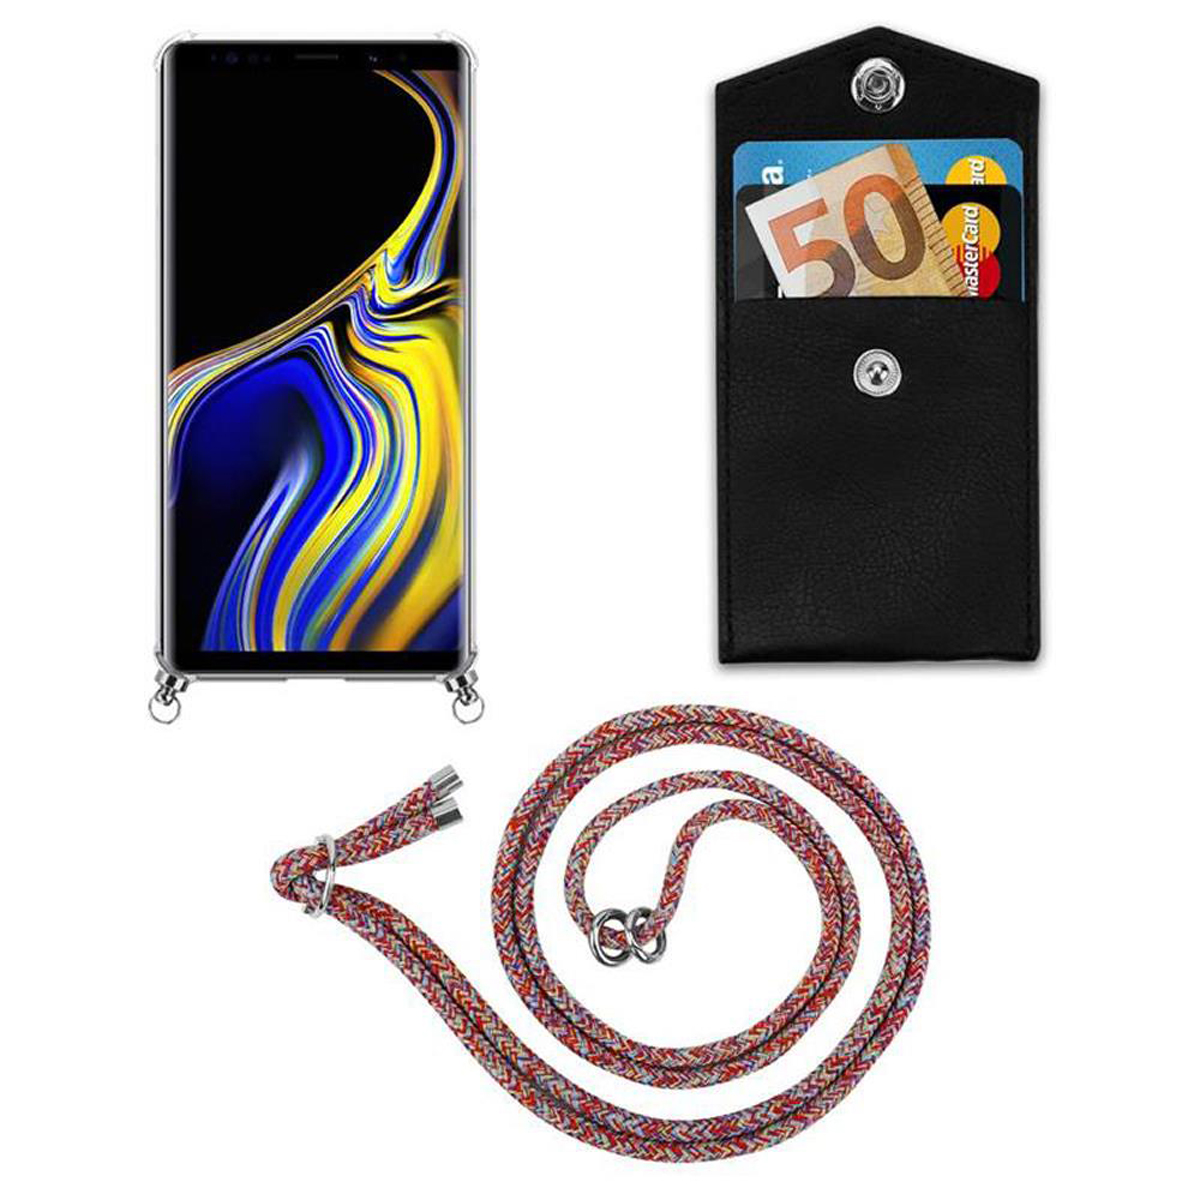 Handy Silber Band Samsung, Backcover, PARROT NOTE COLORFUL Kordel CADORABO abnehmbarer 9, und Hülle, mit Galaxy Kette Ringen,